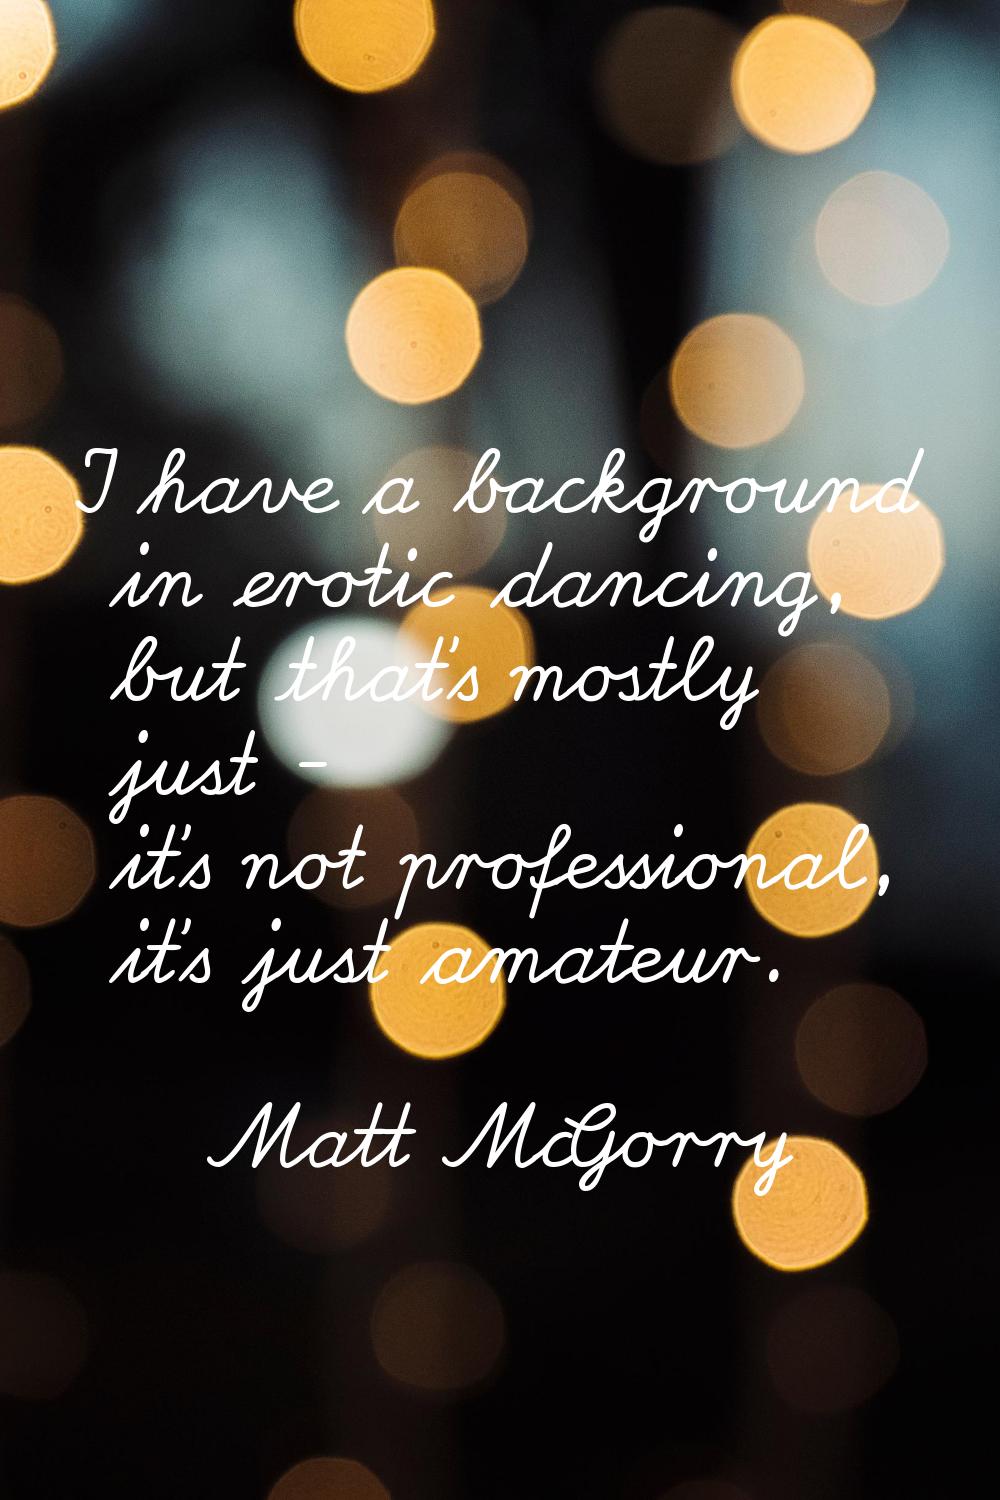 I have a background in erotic dancing, but that's mostly just - it's not professional, it's just am